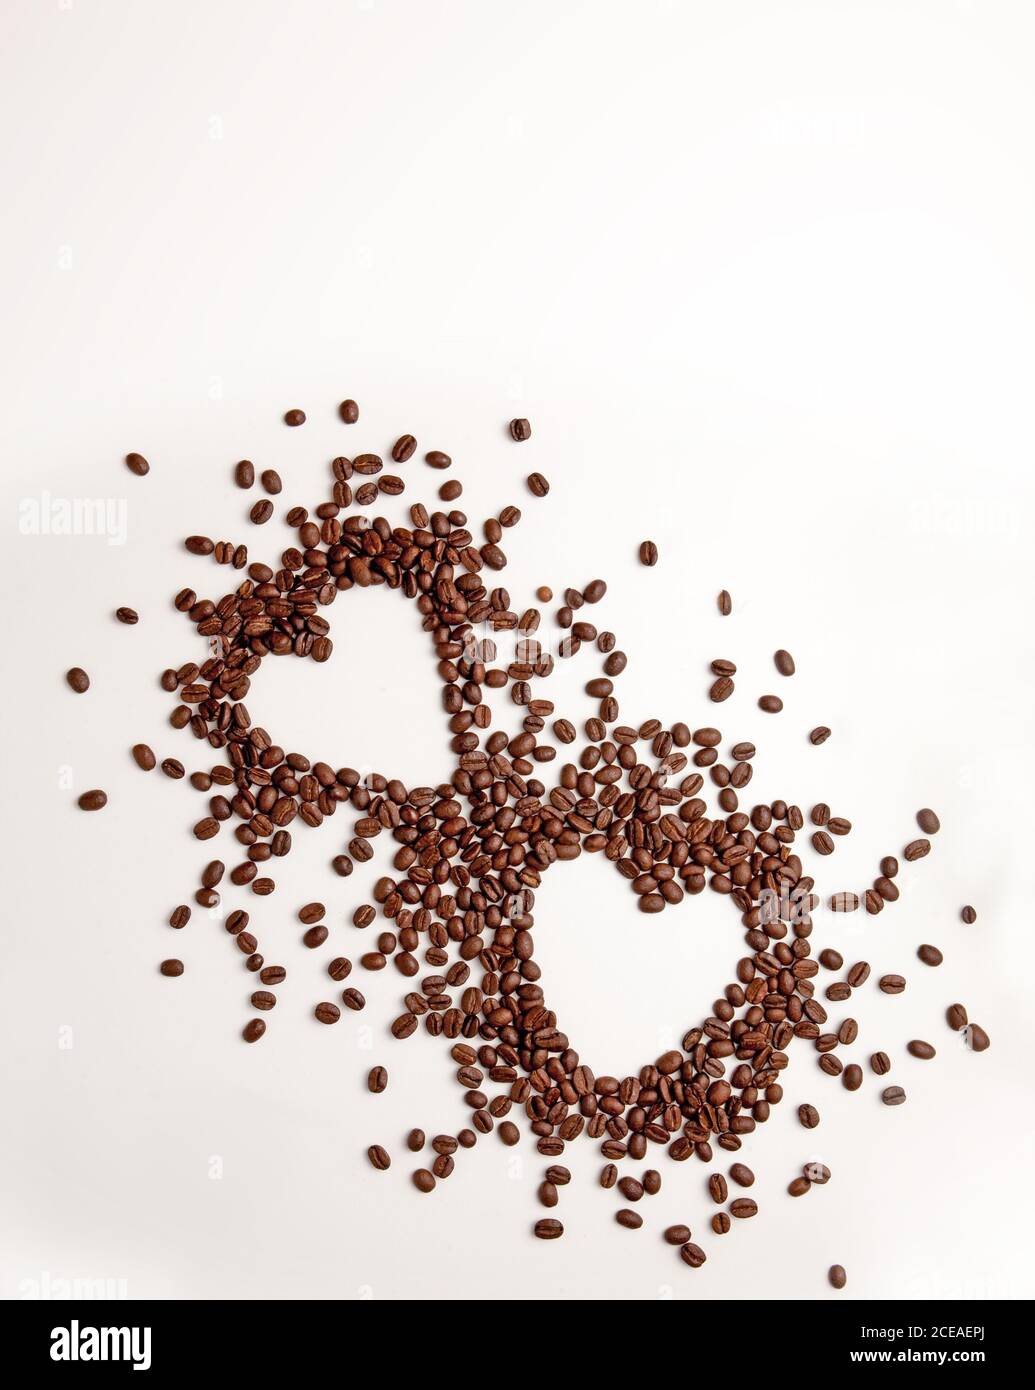 Coffee beans on a white background in the shape of a heart. Stock Photo